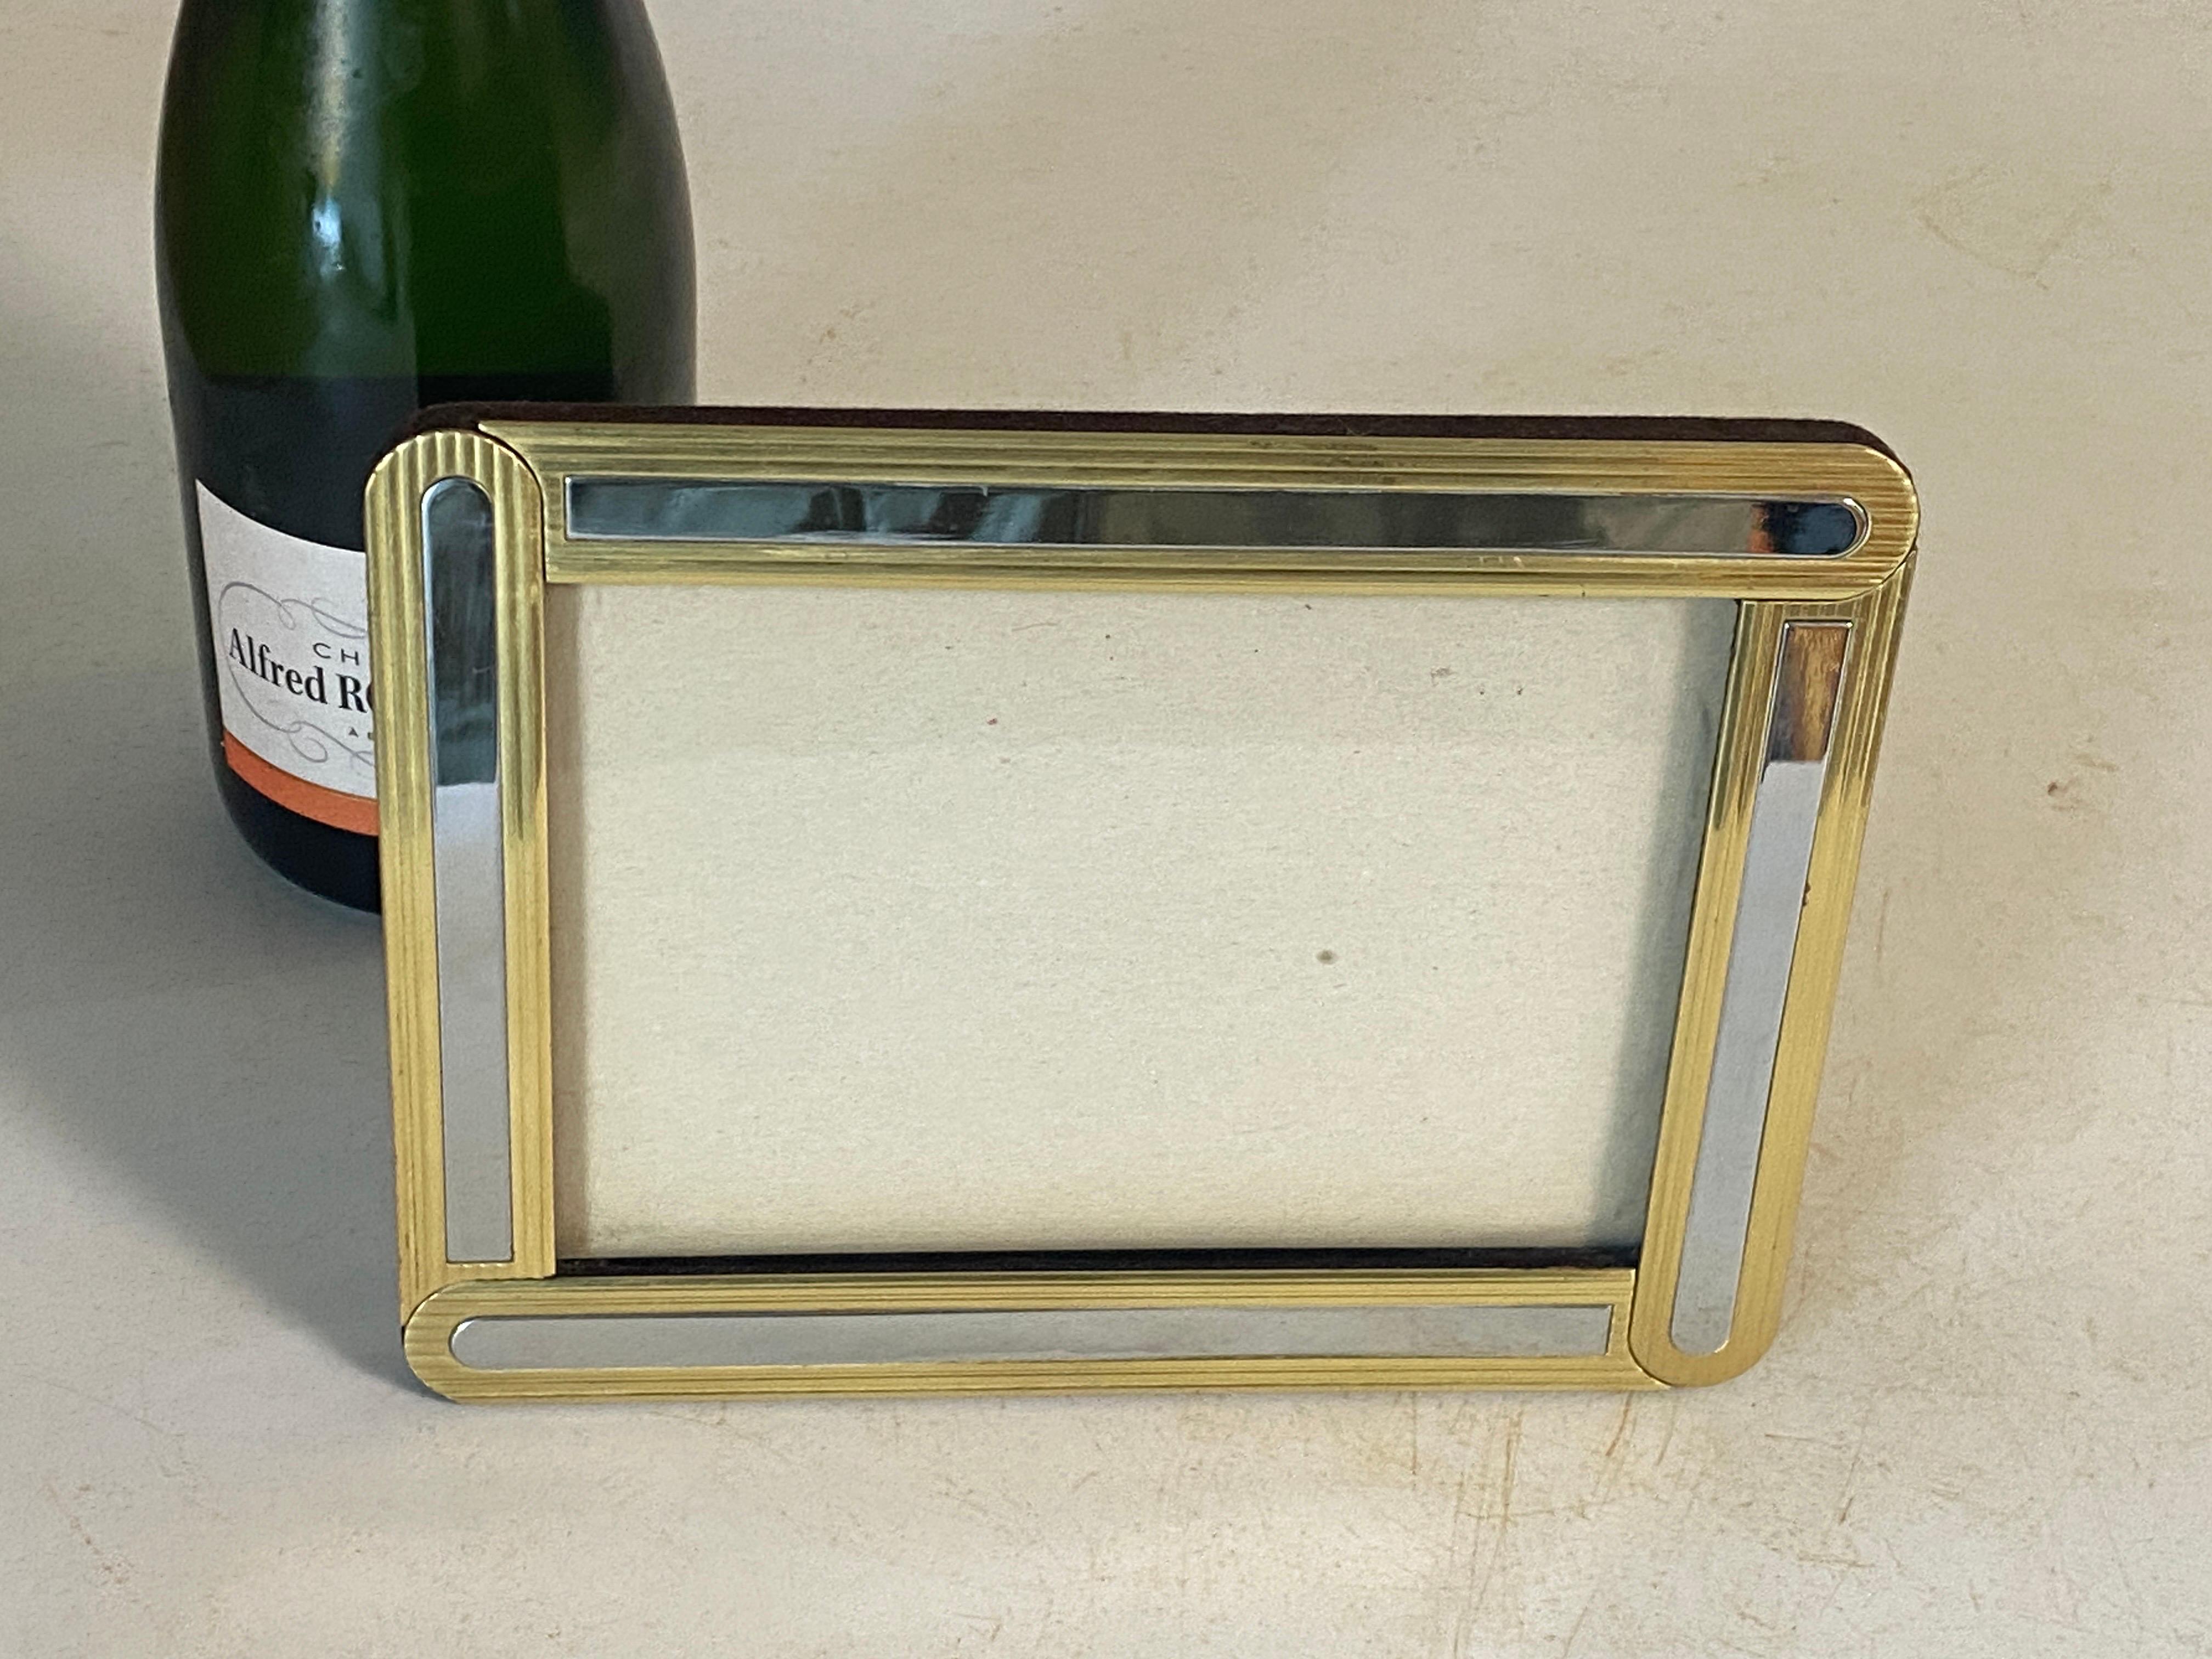 Vintage Italian picture frame, 1970s. this has been made in Italy. In Chrome and brass.